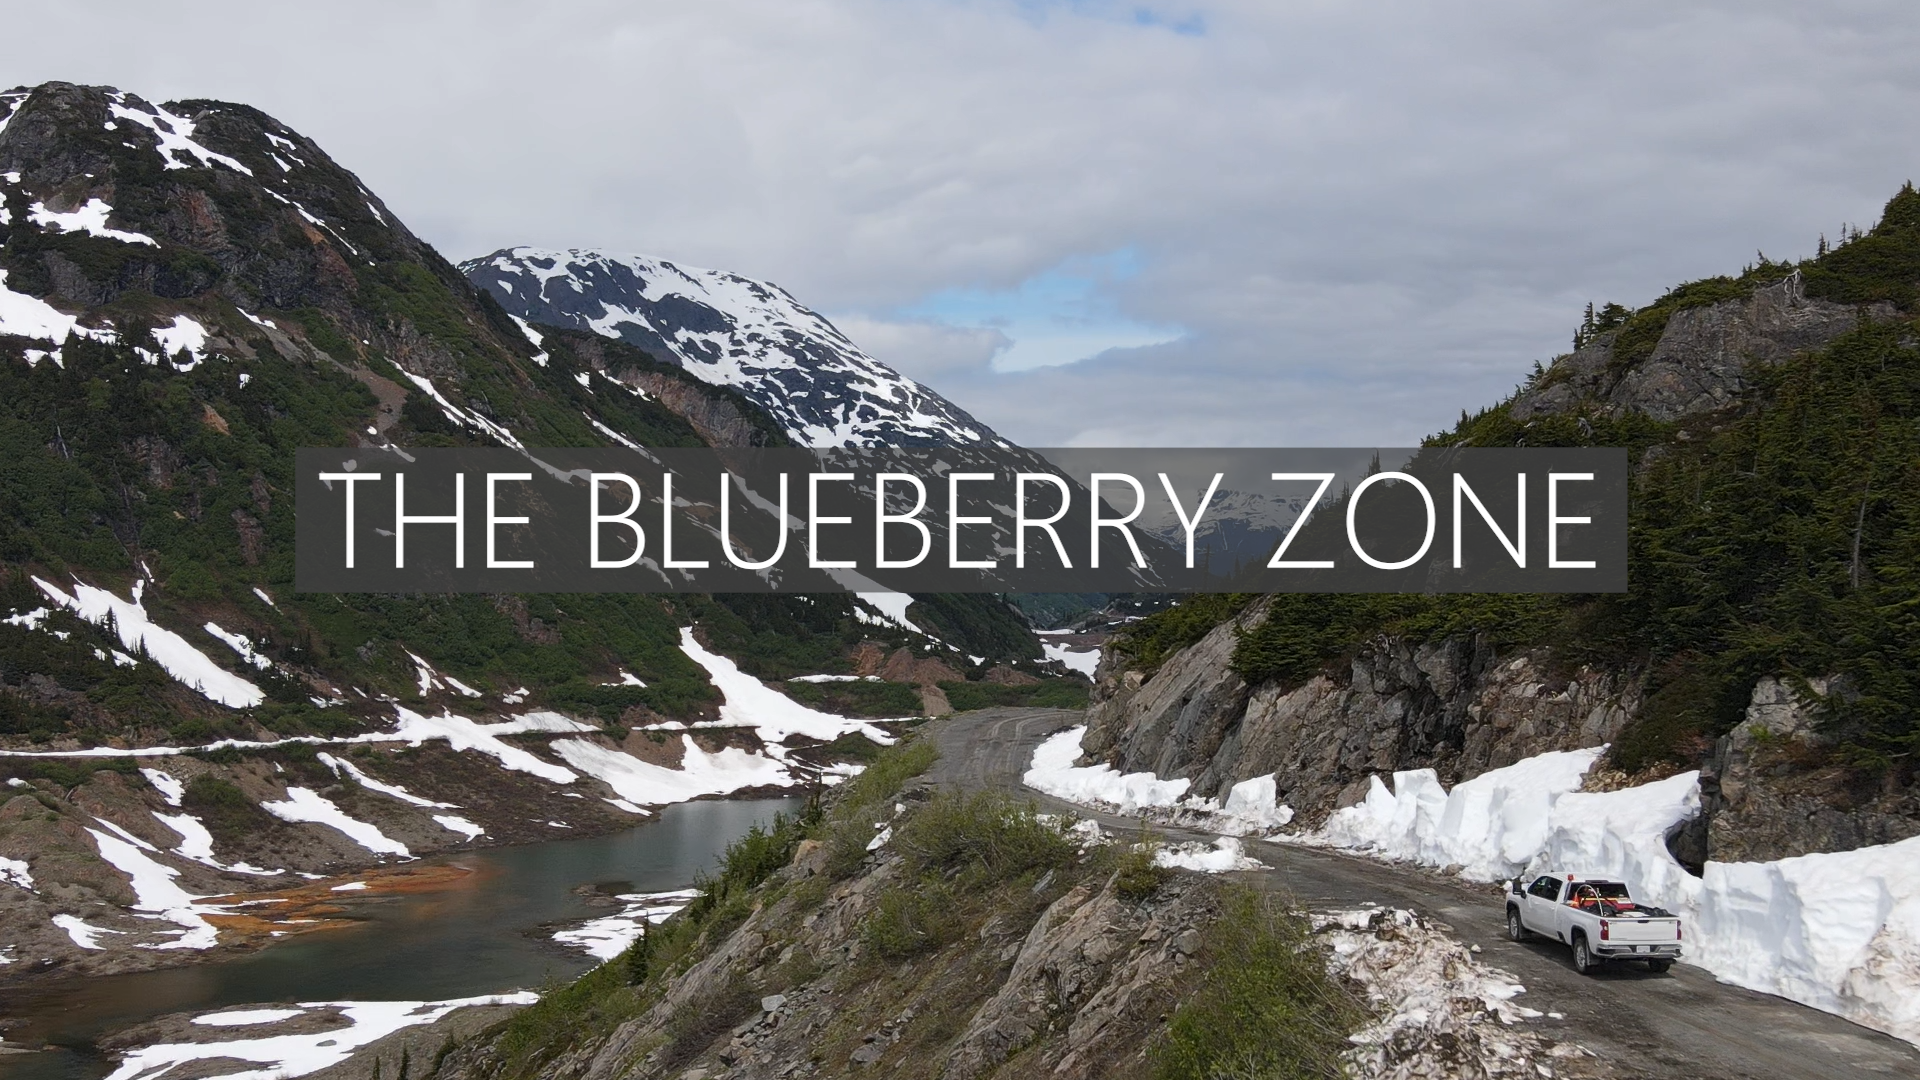 News Release | The Blueberry Zone | 12/08/2020